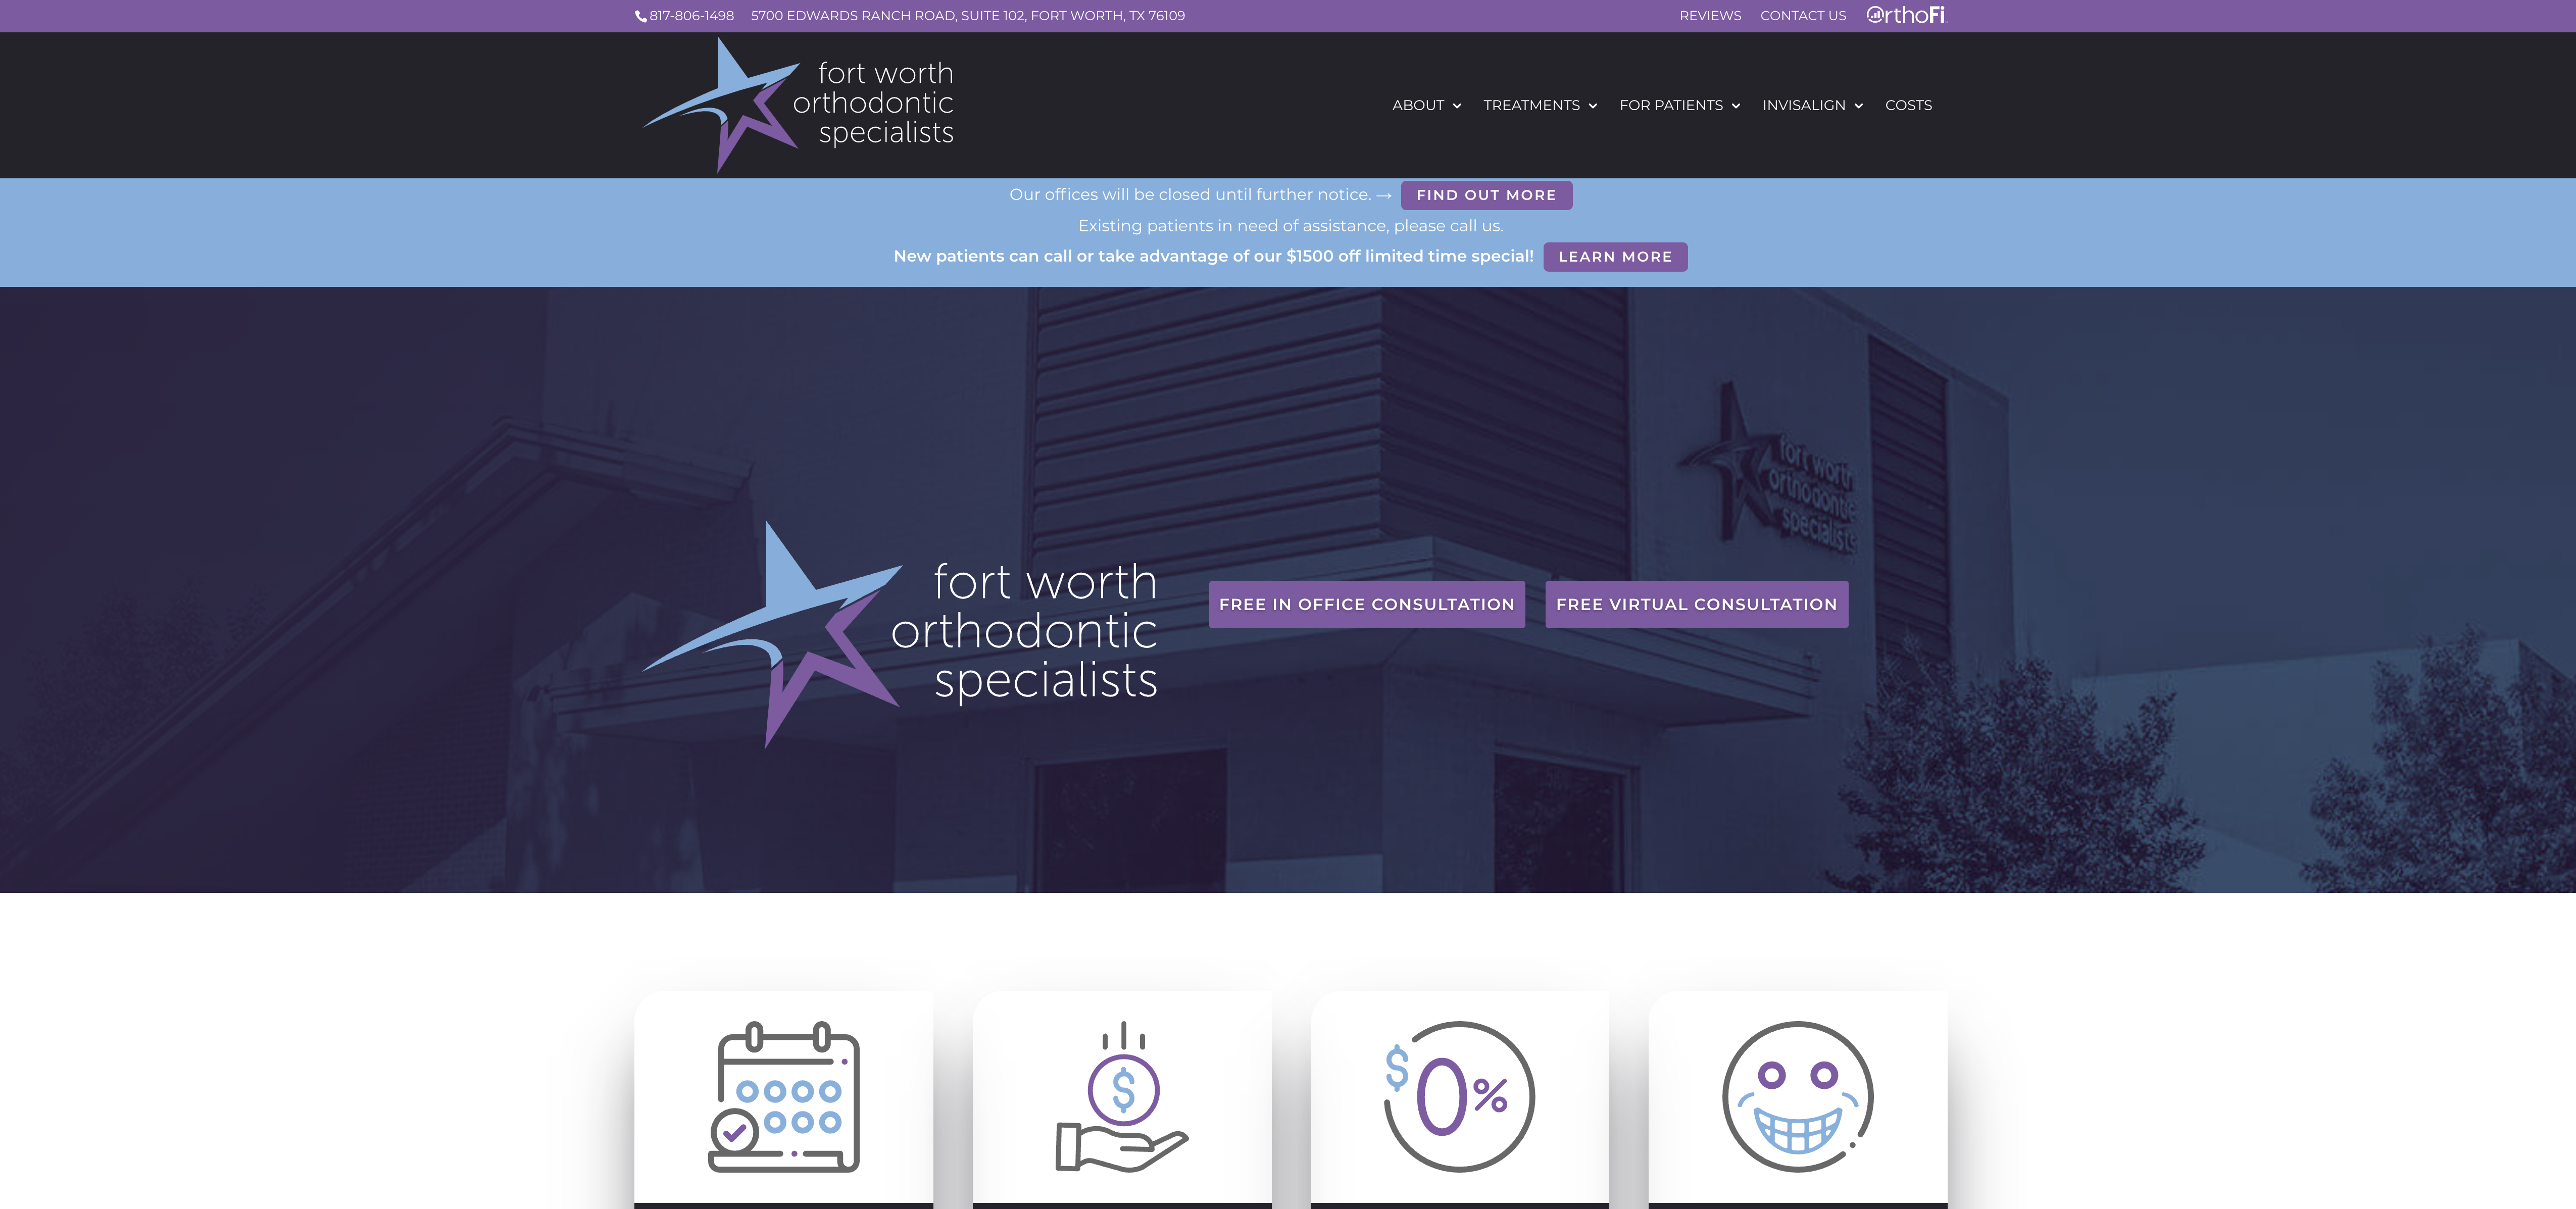 fort worth orthodontic specialists header